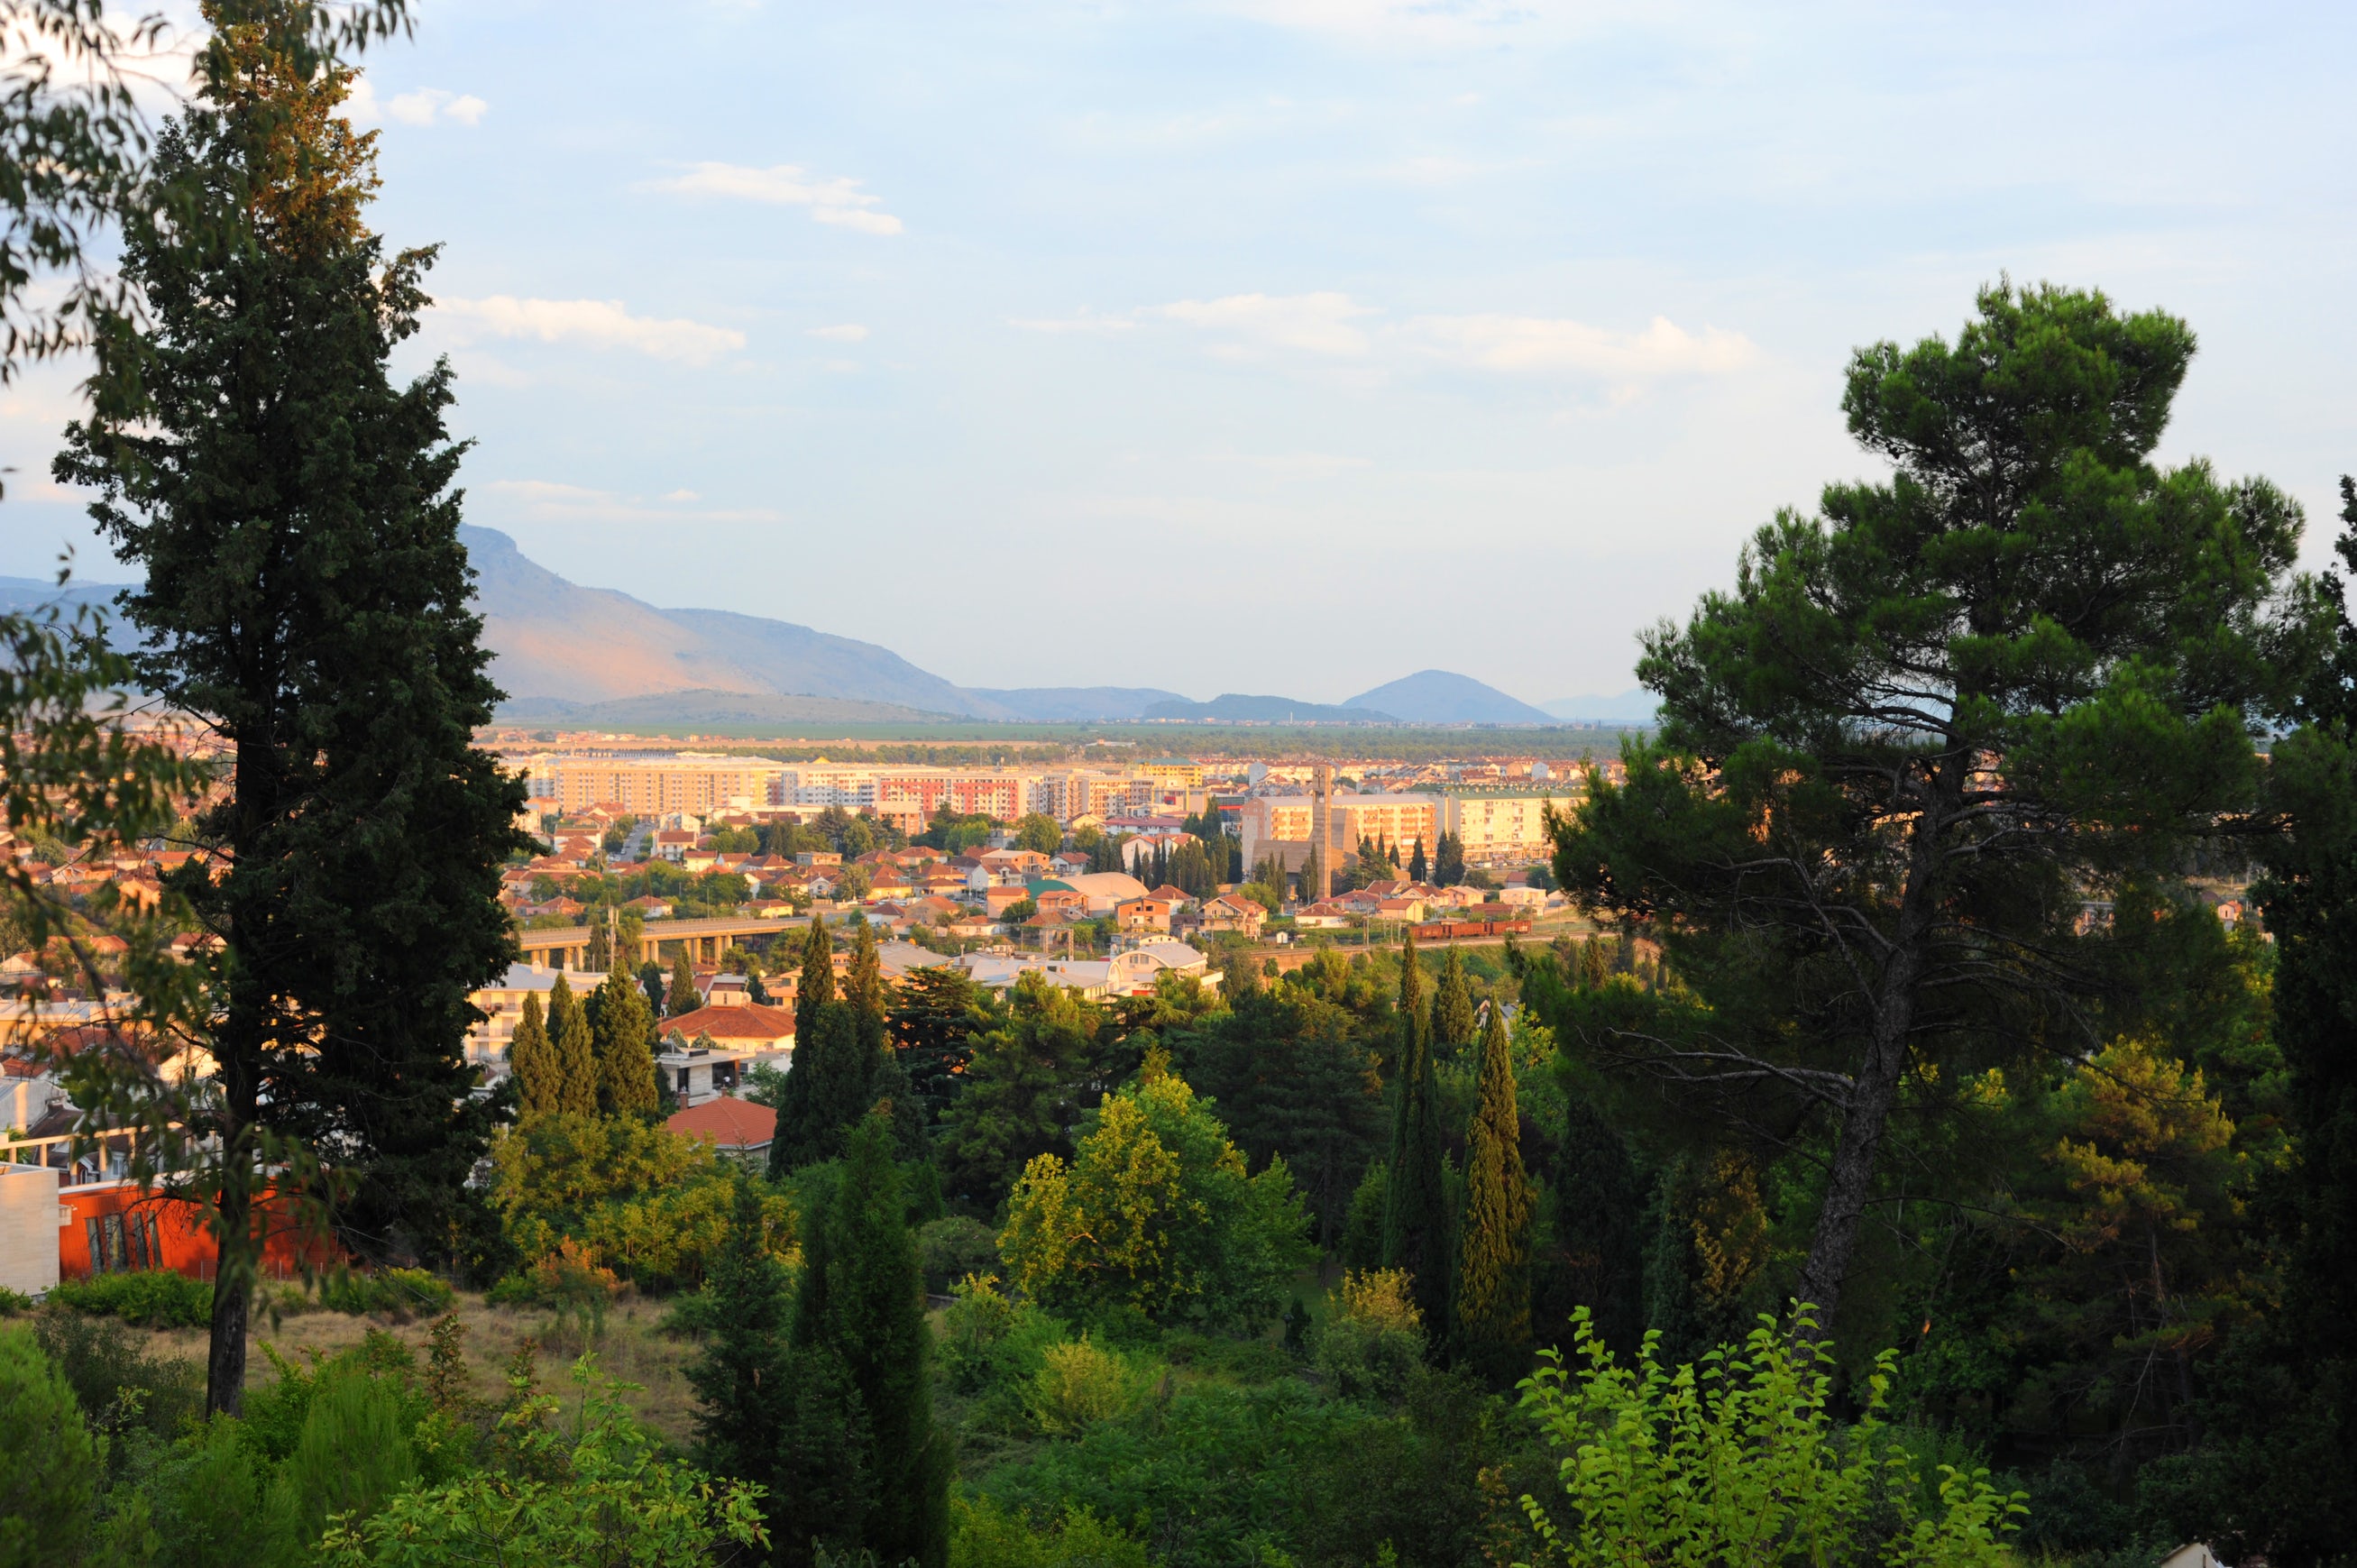 Gorica Hill with the view of the city below